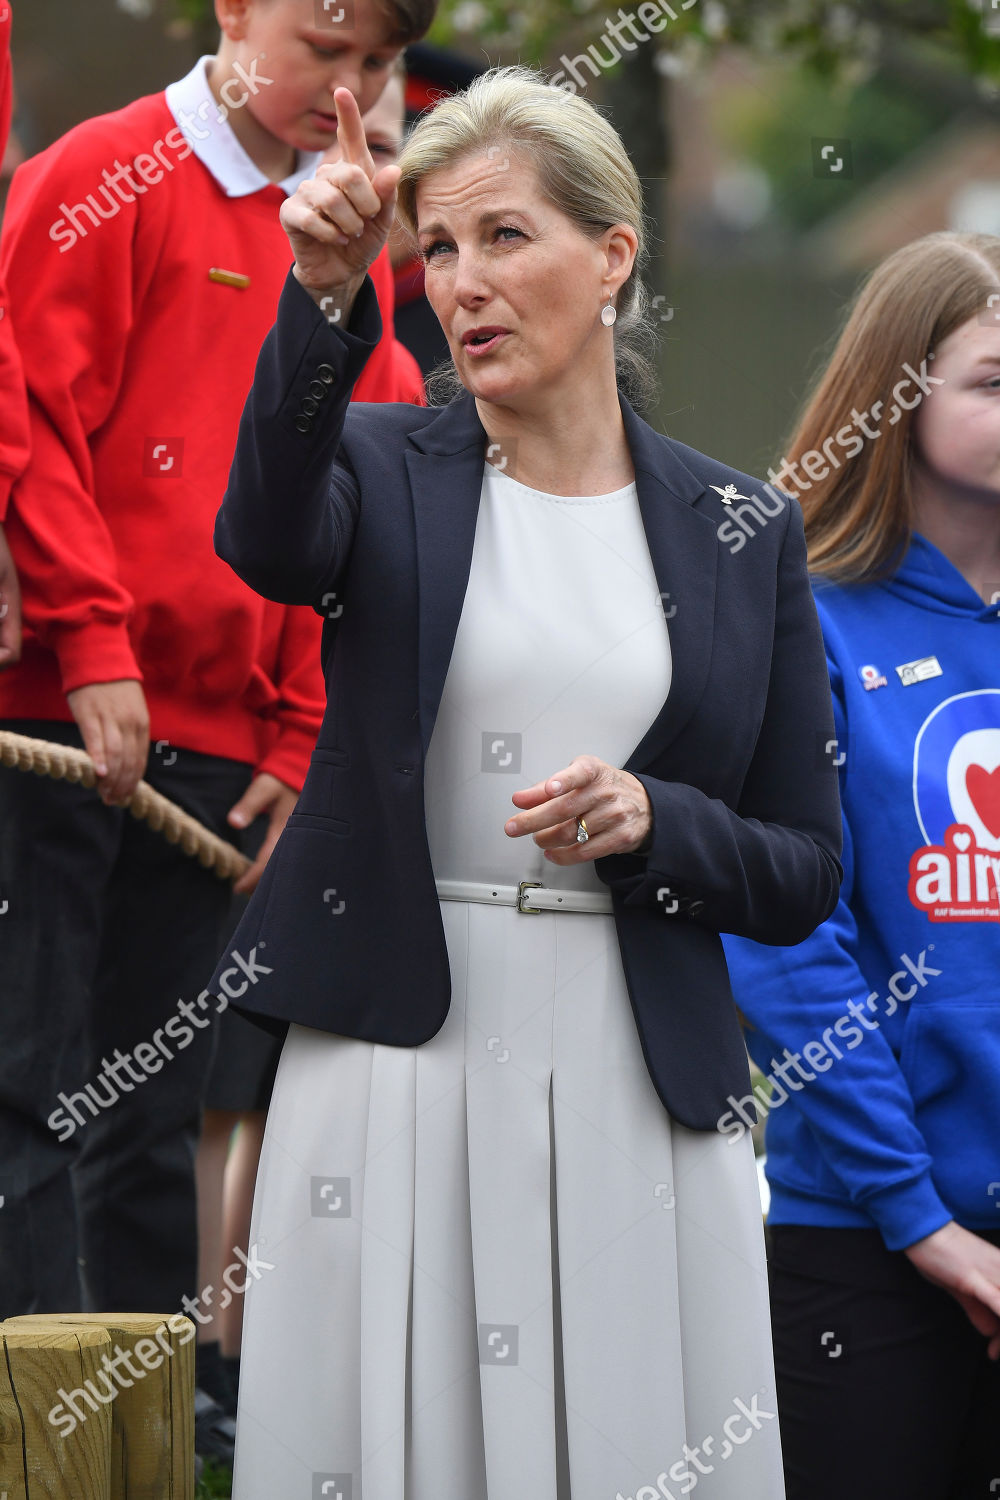 sophie-countess-of-wessex-opens-airplay-play-park-wittering-village-peterborough-uk-shutterstock-editorial-10217568ak.jpg